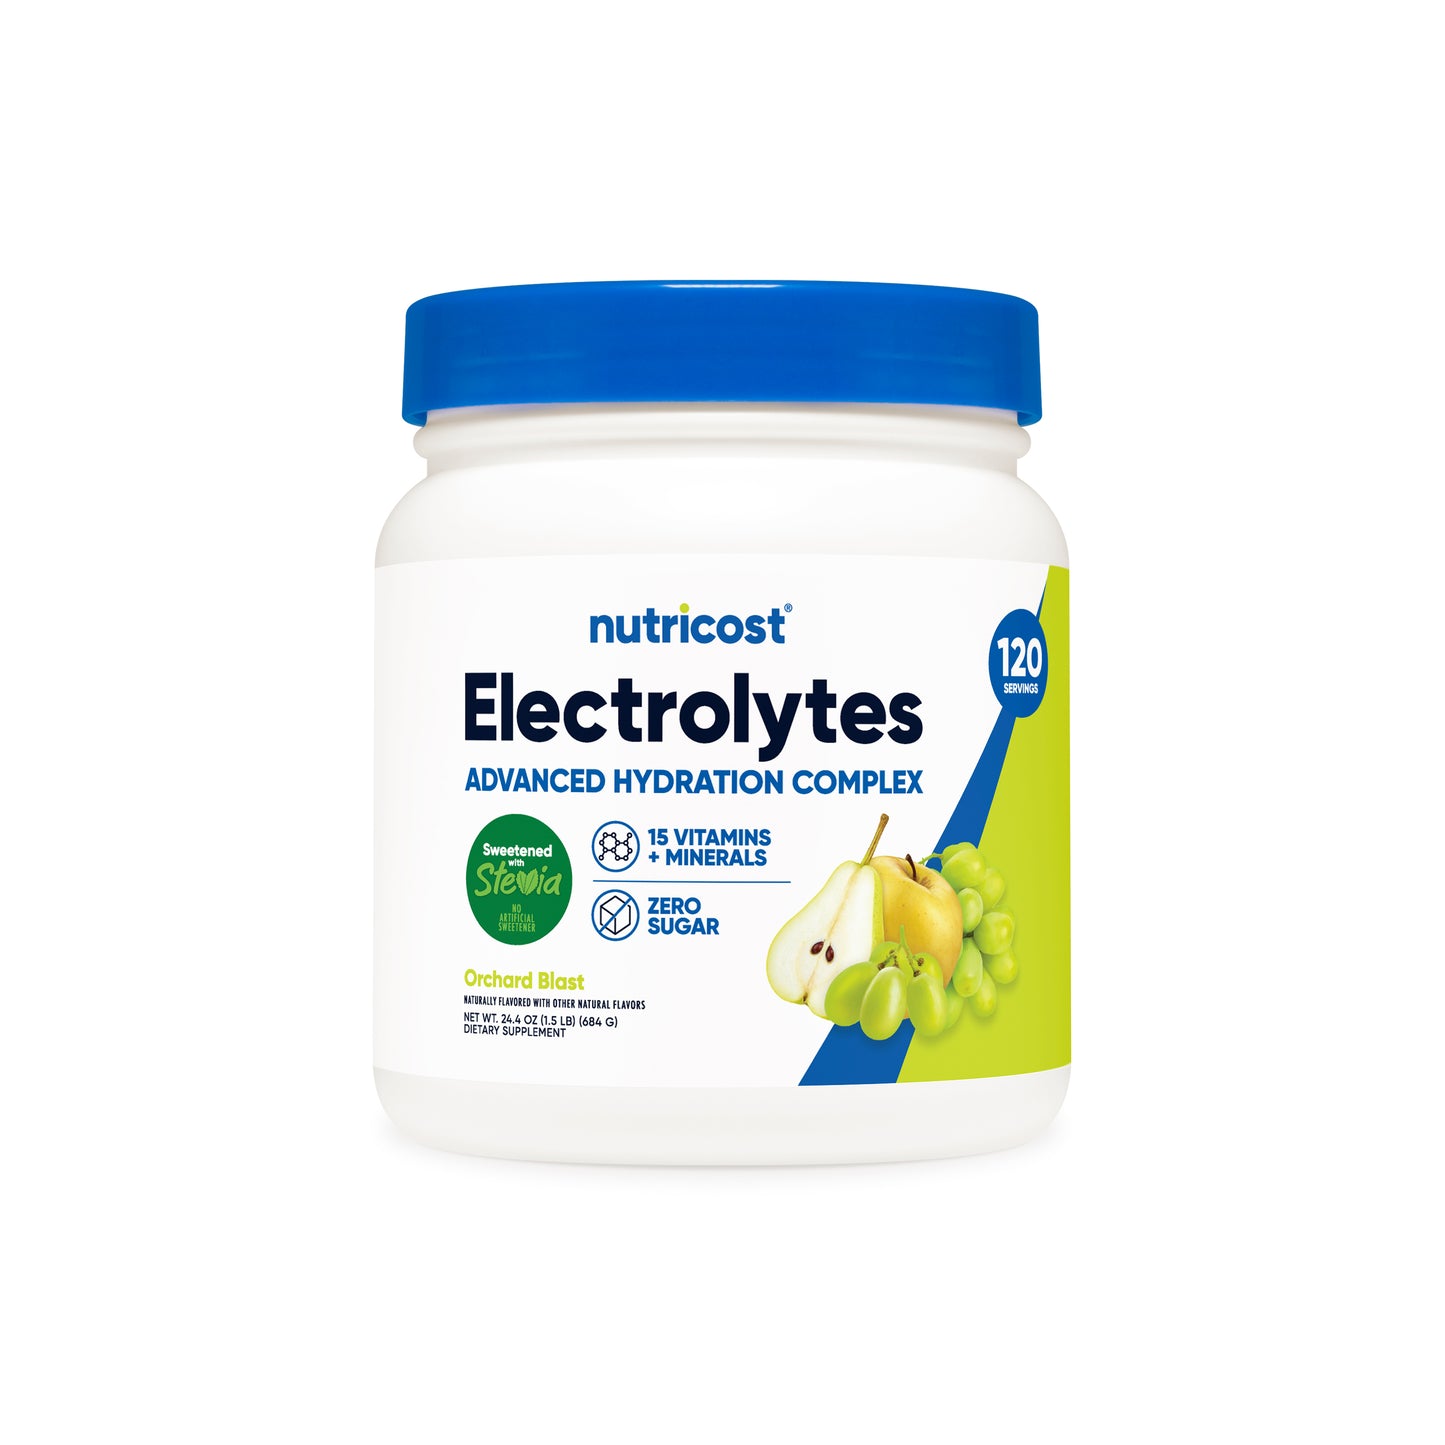 Nutricost Electrolytes